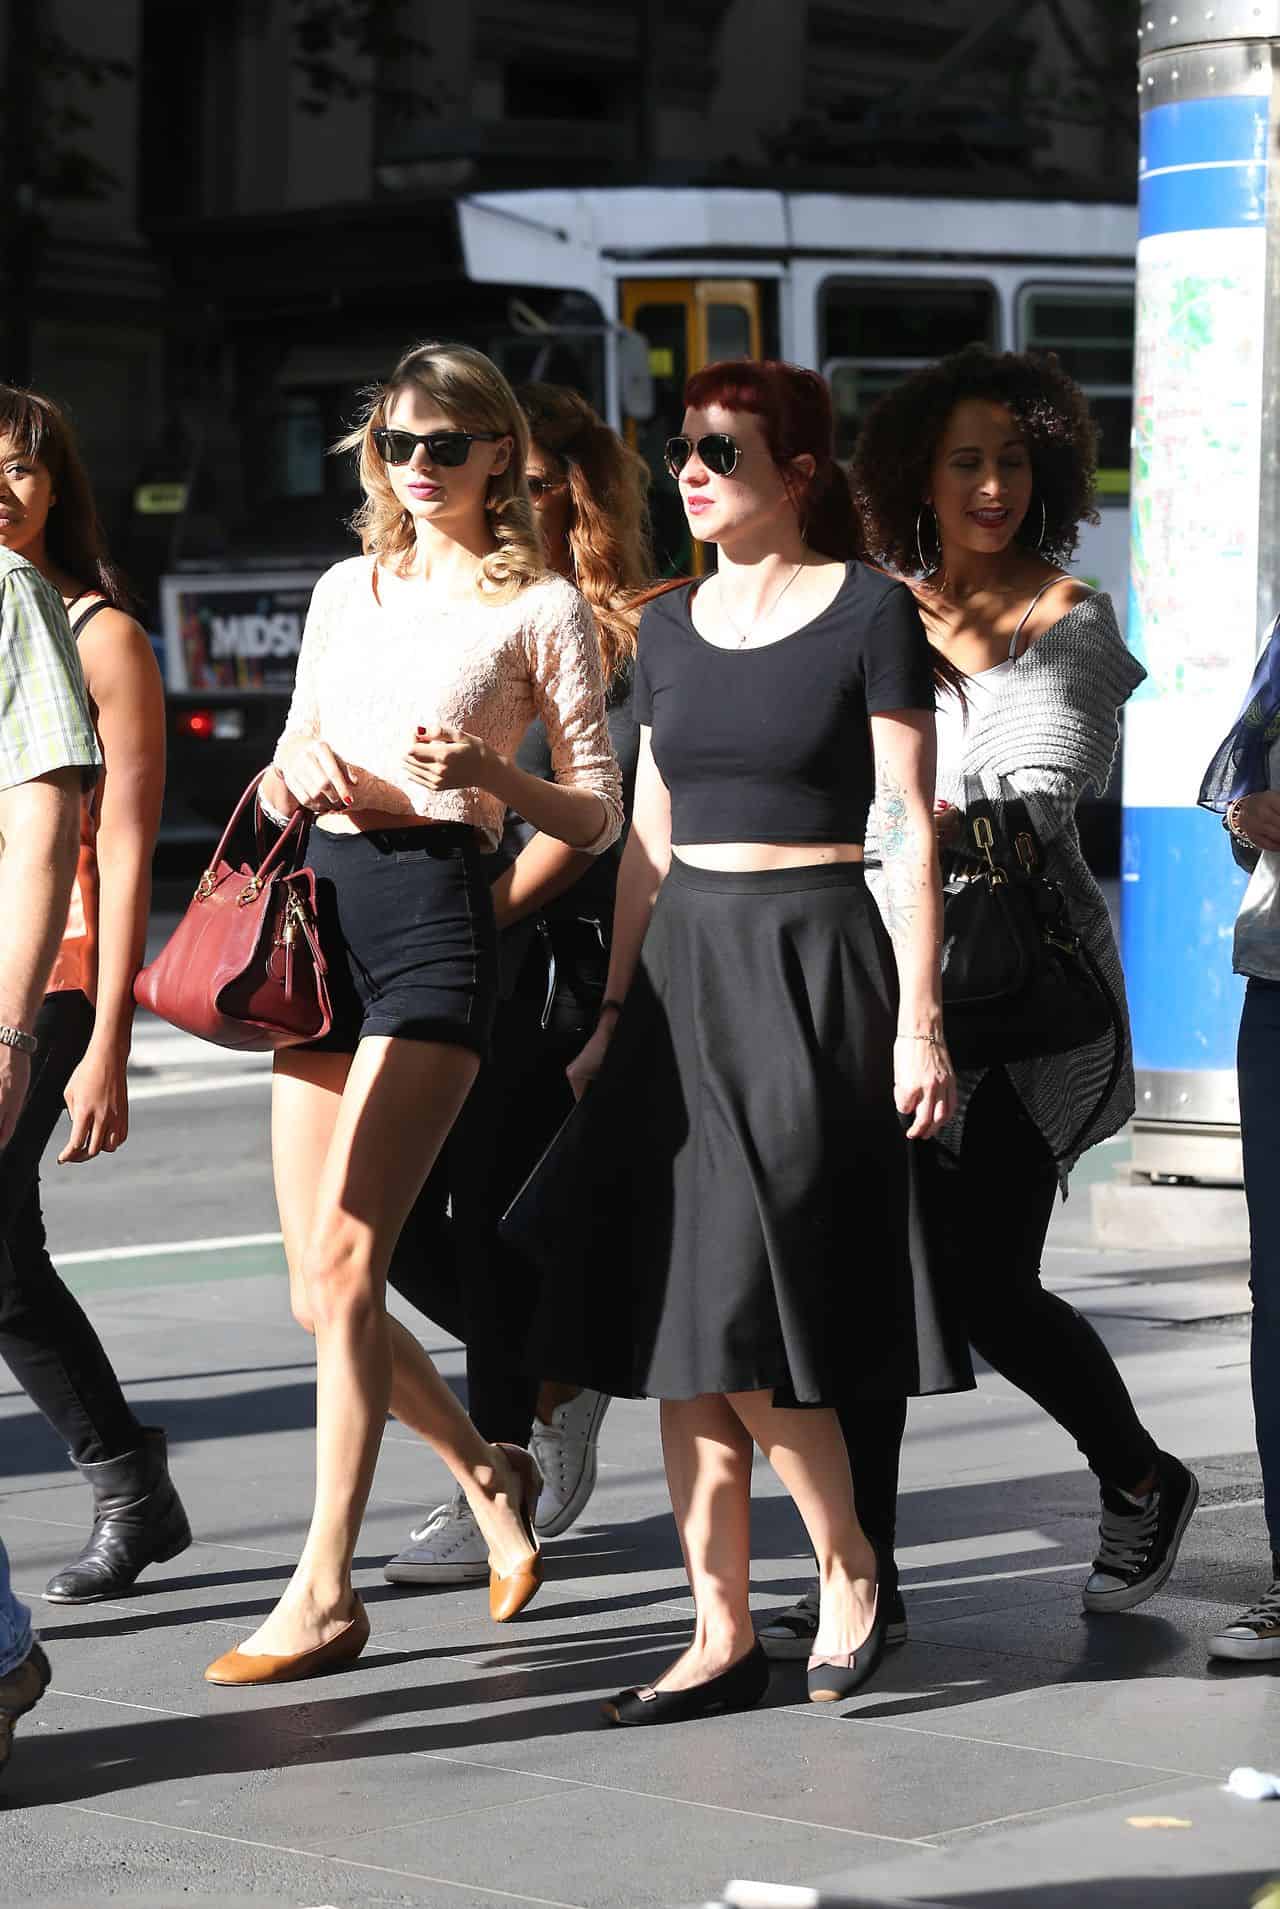 Taylor Swift’s Chic Ensemble Puts Her Toned Legs on Display in Melbourne